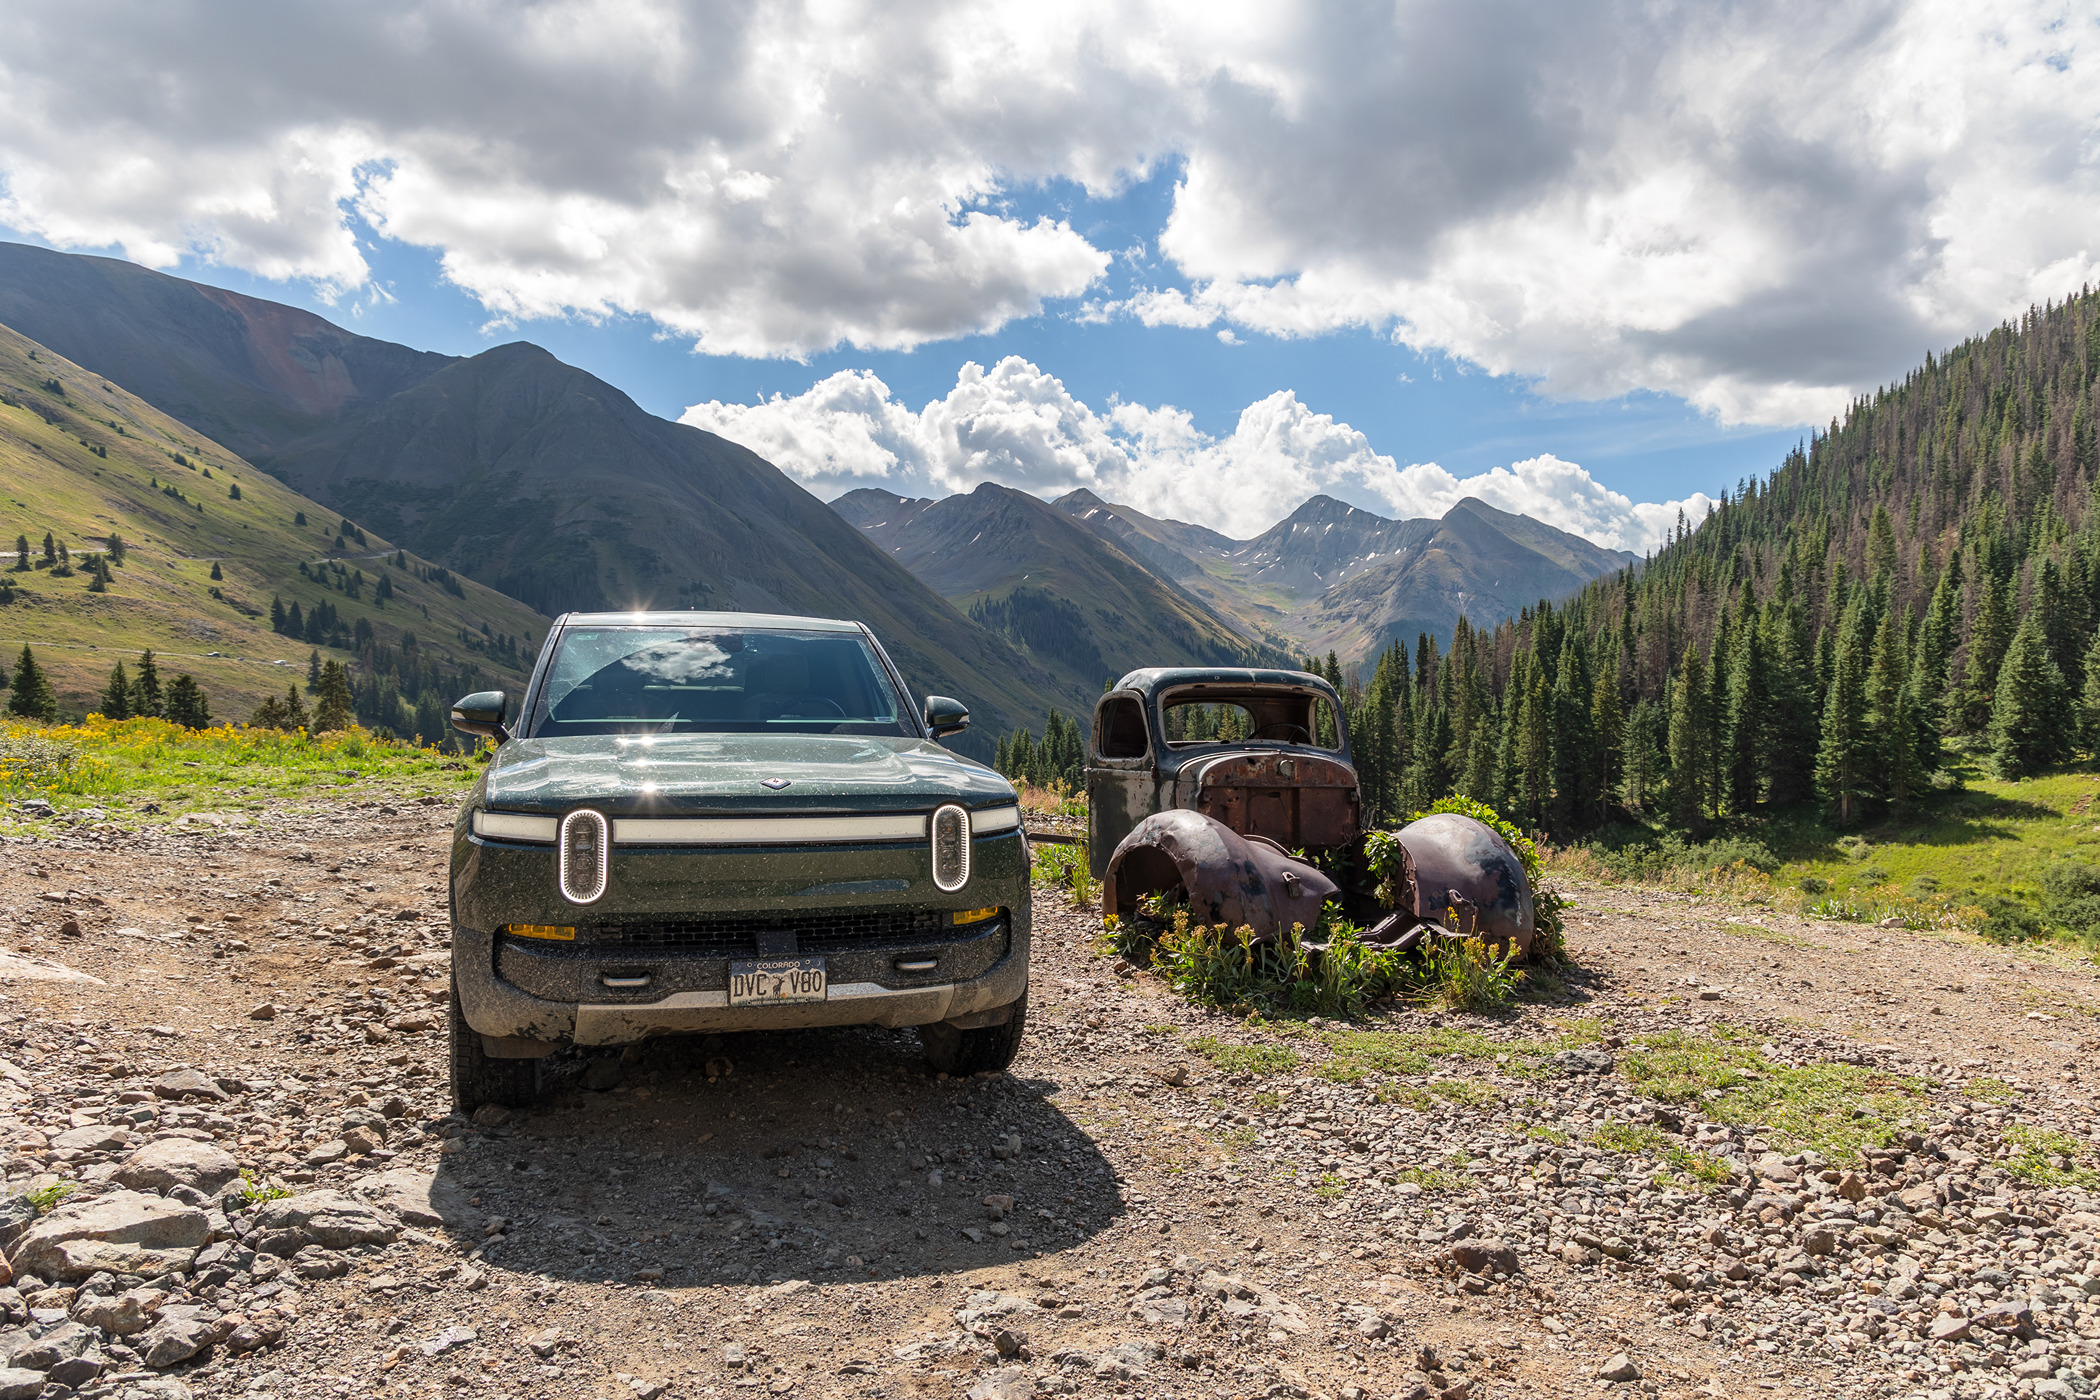 Rivian R1T R1S Where are the Rivian "adventurers"? image5